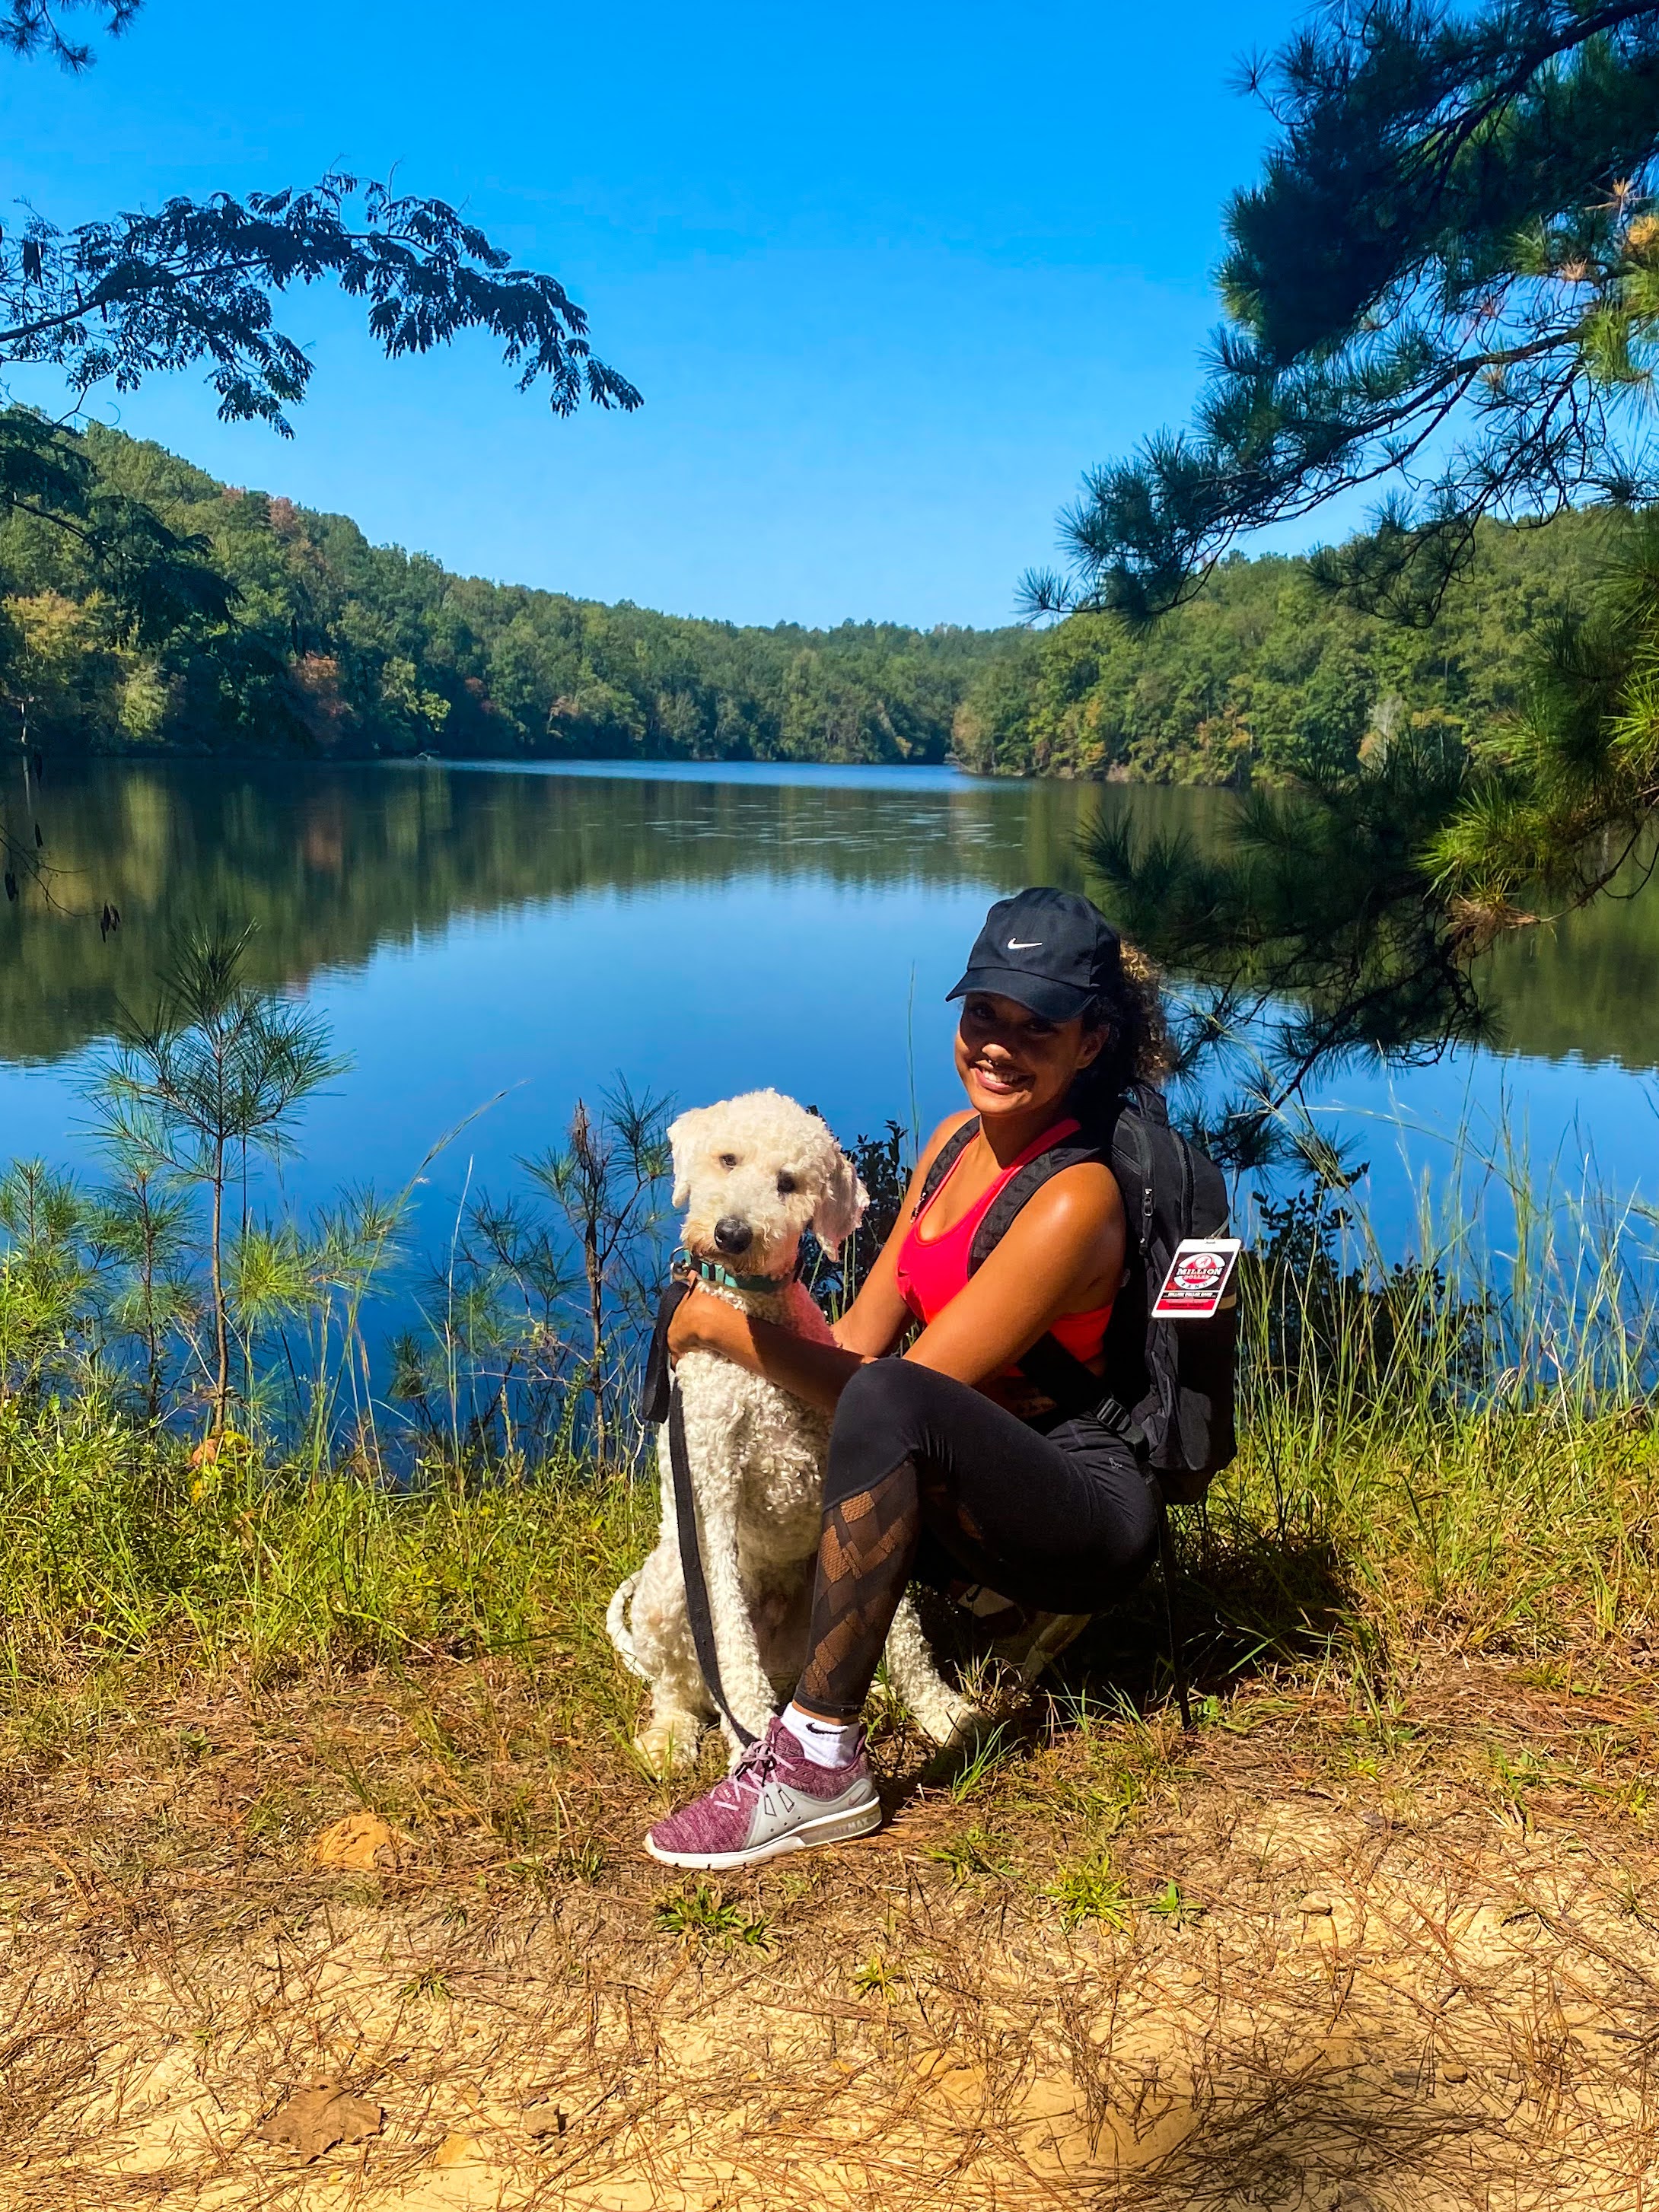 African American woman squatting beside a white dog, embracing it, with a scenic lake in the background.